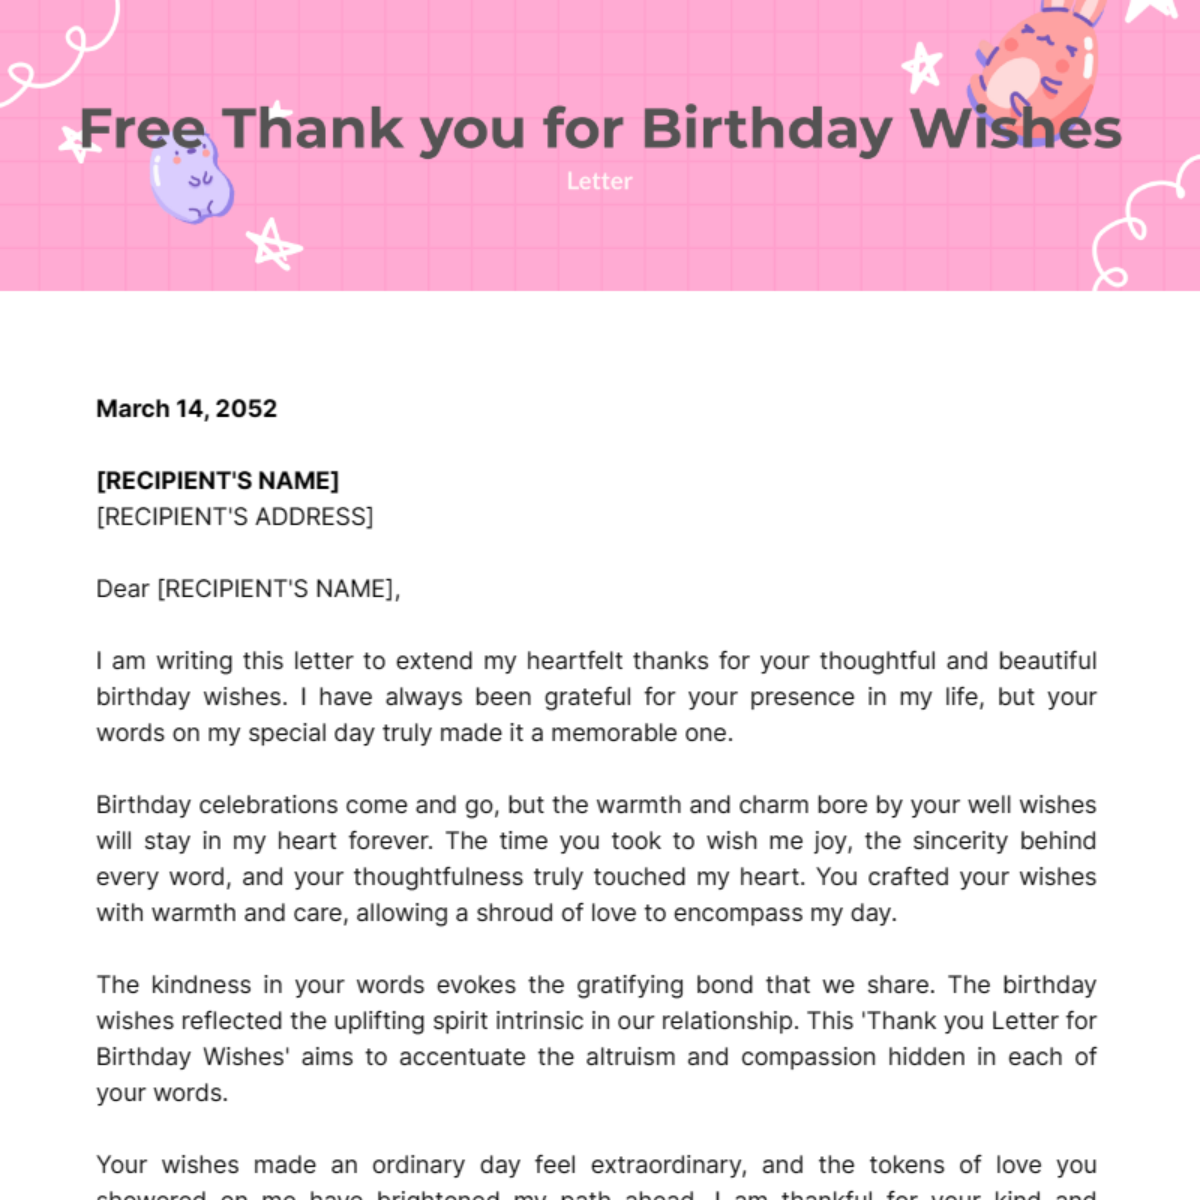 Thank you Letter for Birthday Wishes Template